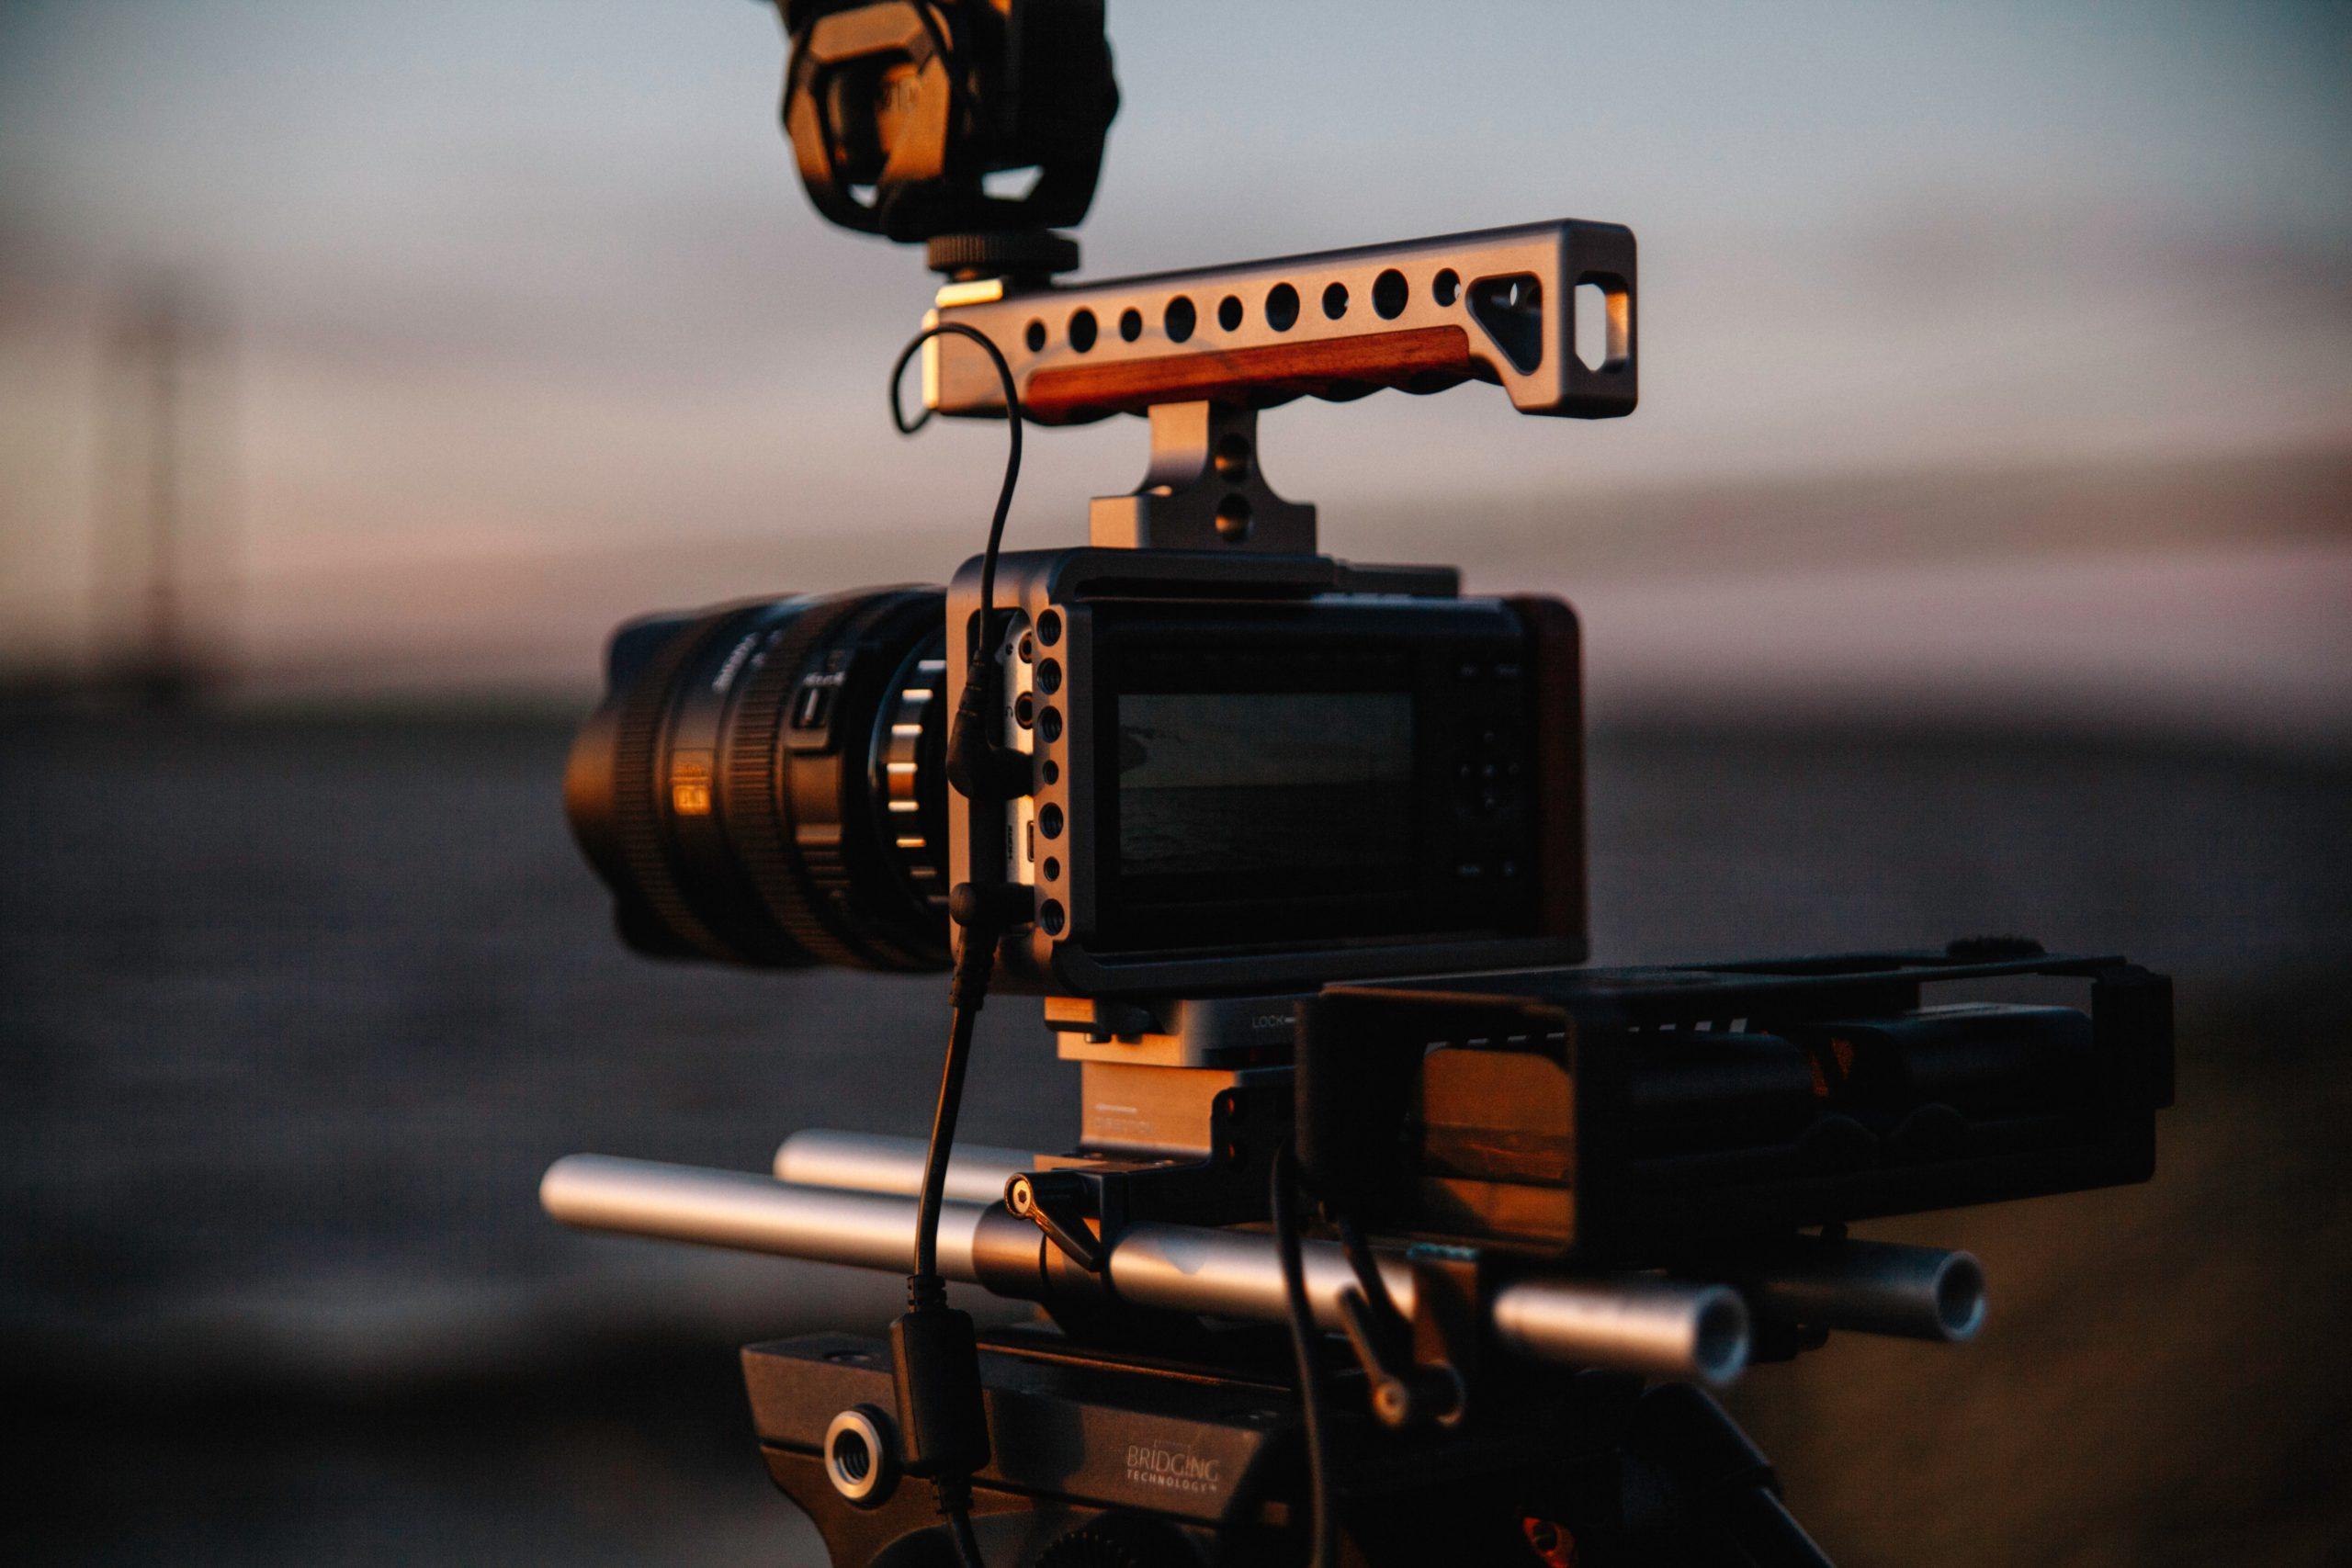 A Breakdown Of The Video Production Process